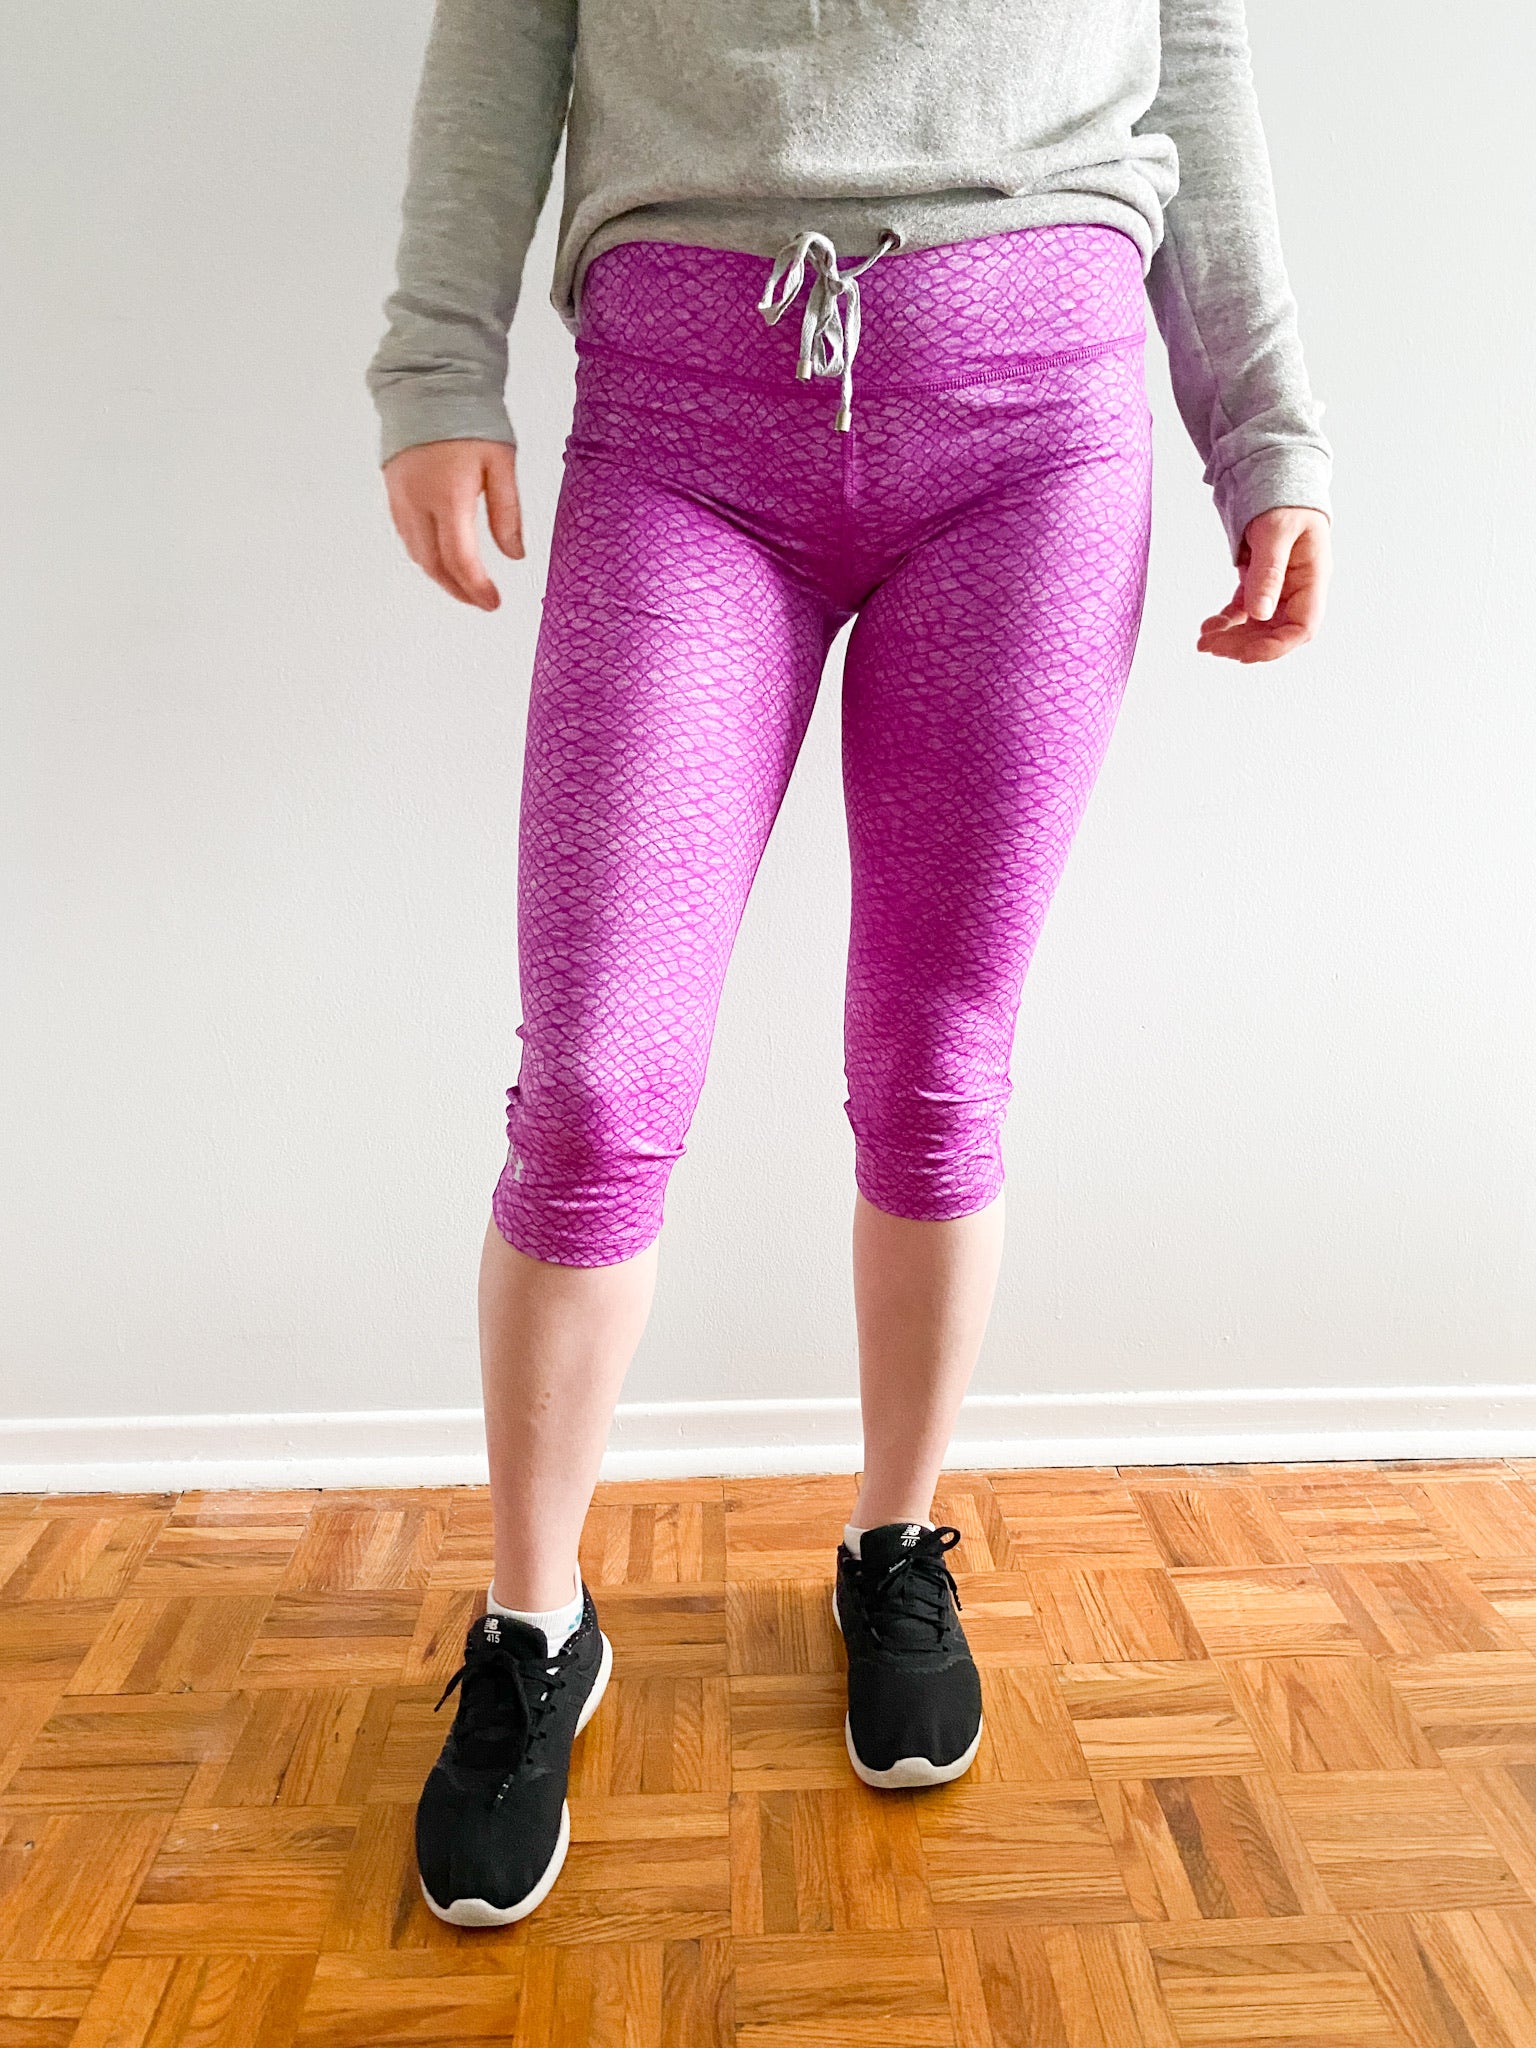 Under Armour Fitted Heat Gear Purple Print Cropped Workout Leggings - S/M